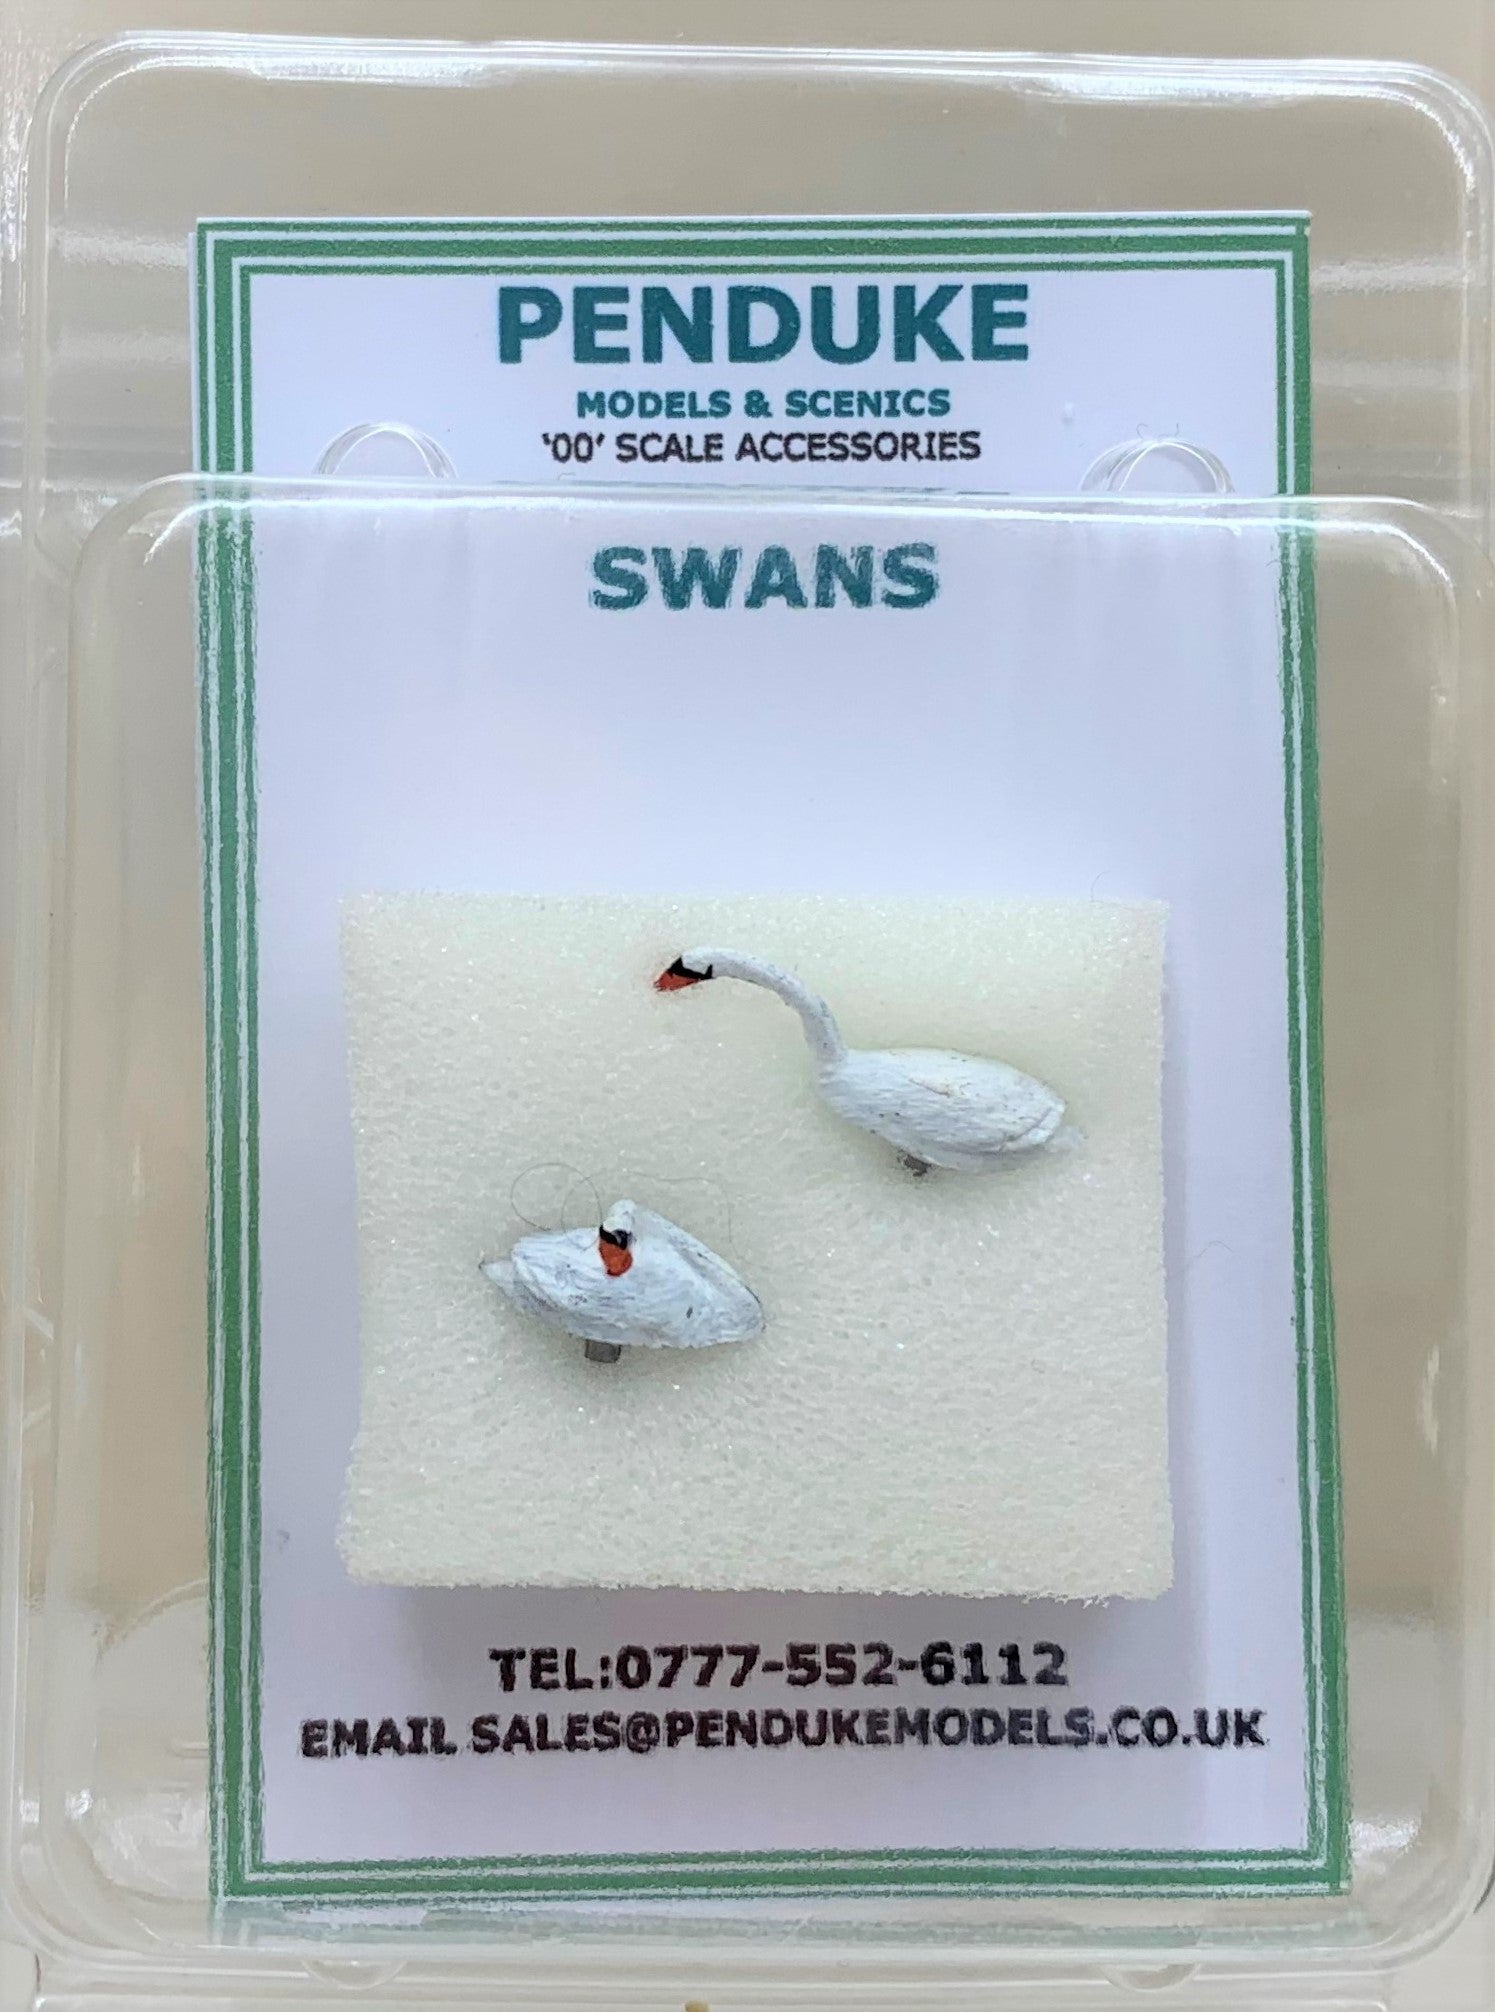 'White Swans' '00' scale